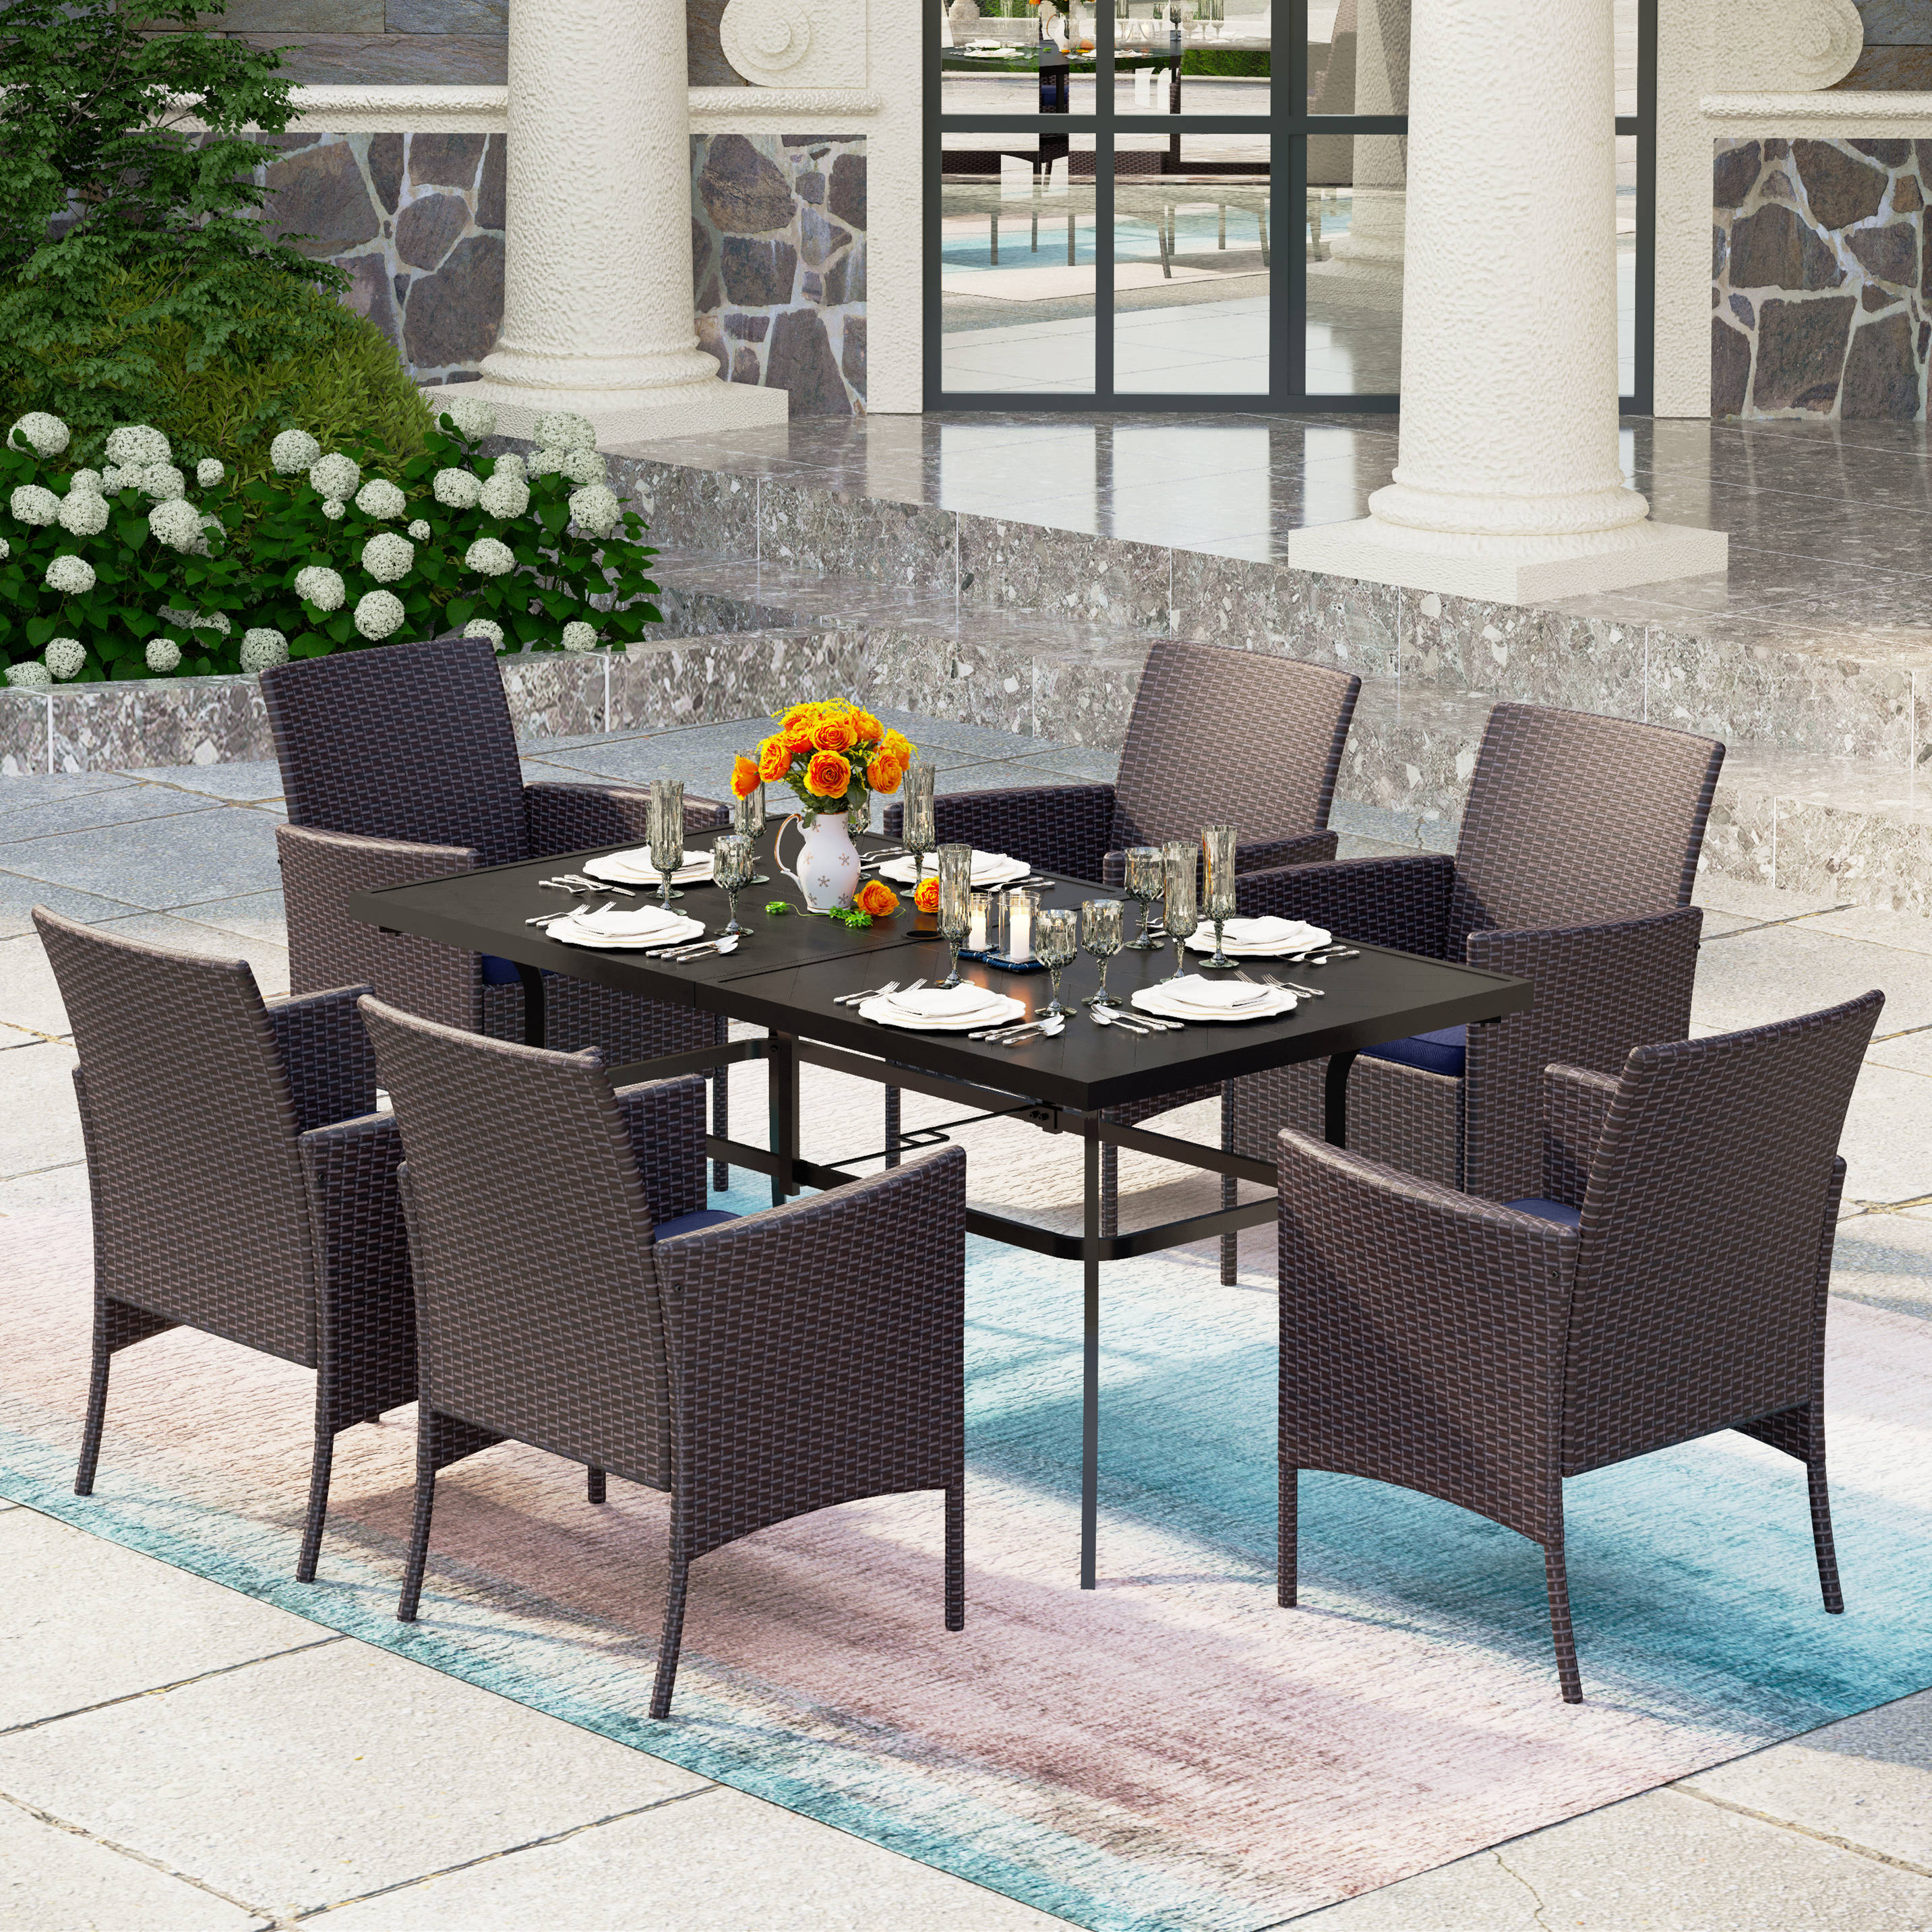 MFSTUDIO 7-Piece Patio Dining Set Embossed Table & Cushioned Rattan Fixed Chairs